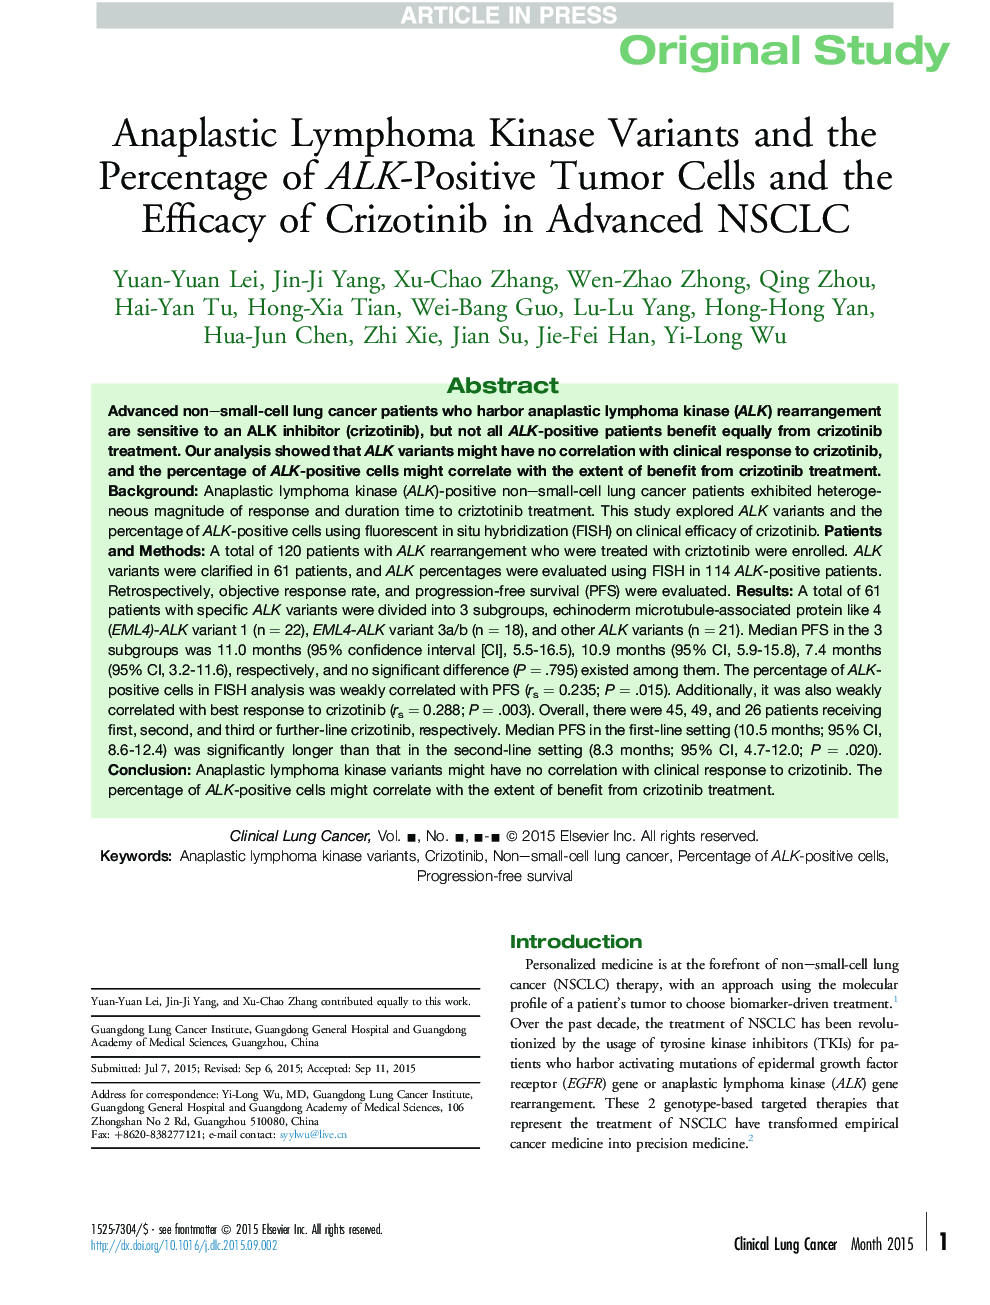 Anaplastic Lymphoma Kinase Variants and the Percentage of ALK-Positive Tumor Cells and the Efficacy of Crizotinib in Advanced NSCLC